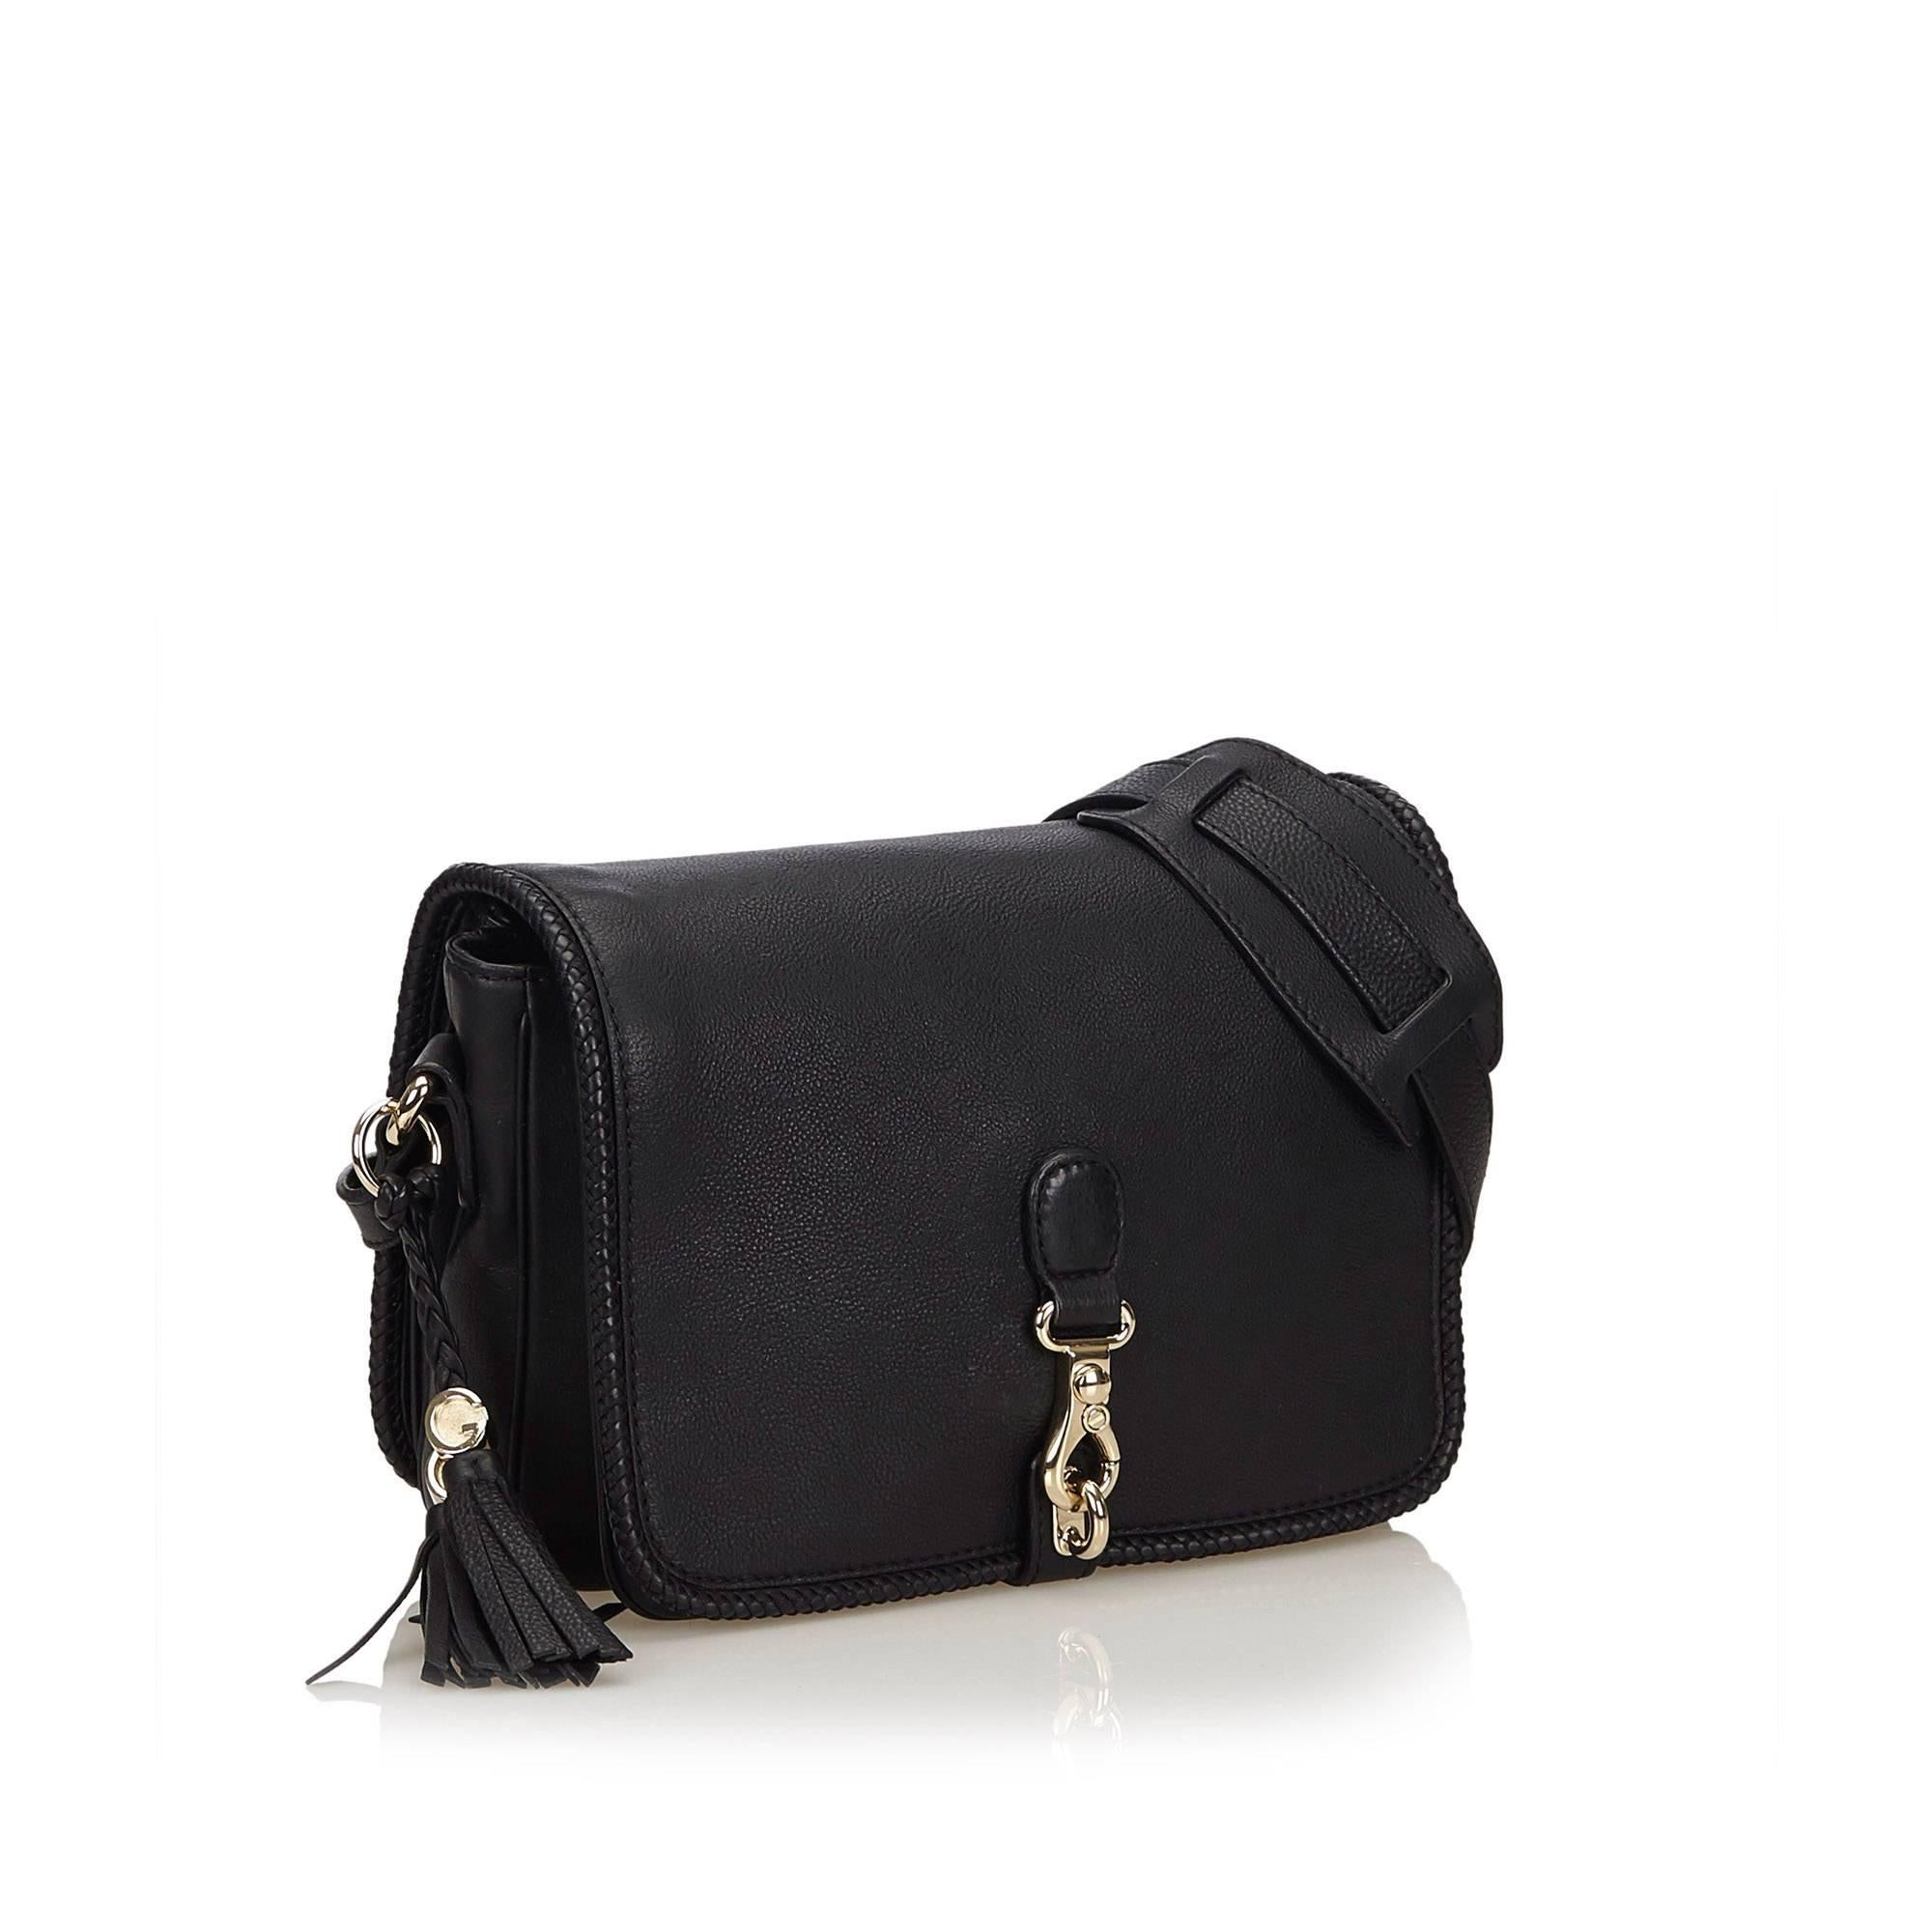 The Marrakech Messenger Bag features a leather body, tassel detail, flat strap, front flap with clasp closure, four interior compartments, and interior zip and slip pockets. 

It carries an A condition rating.

Dimensions: 
Length 20 cm
Width 30